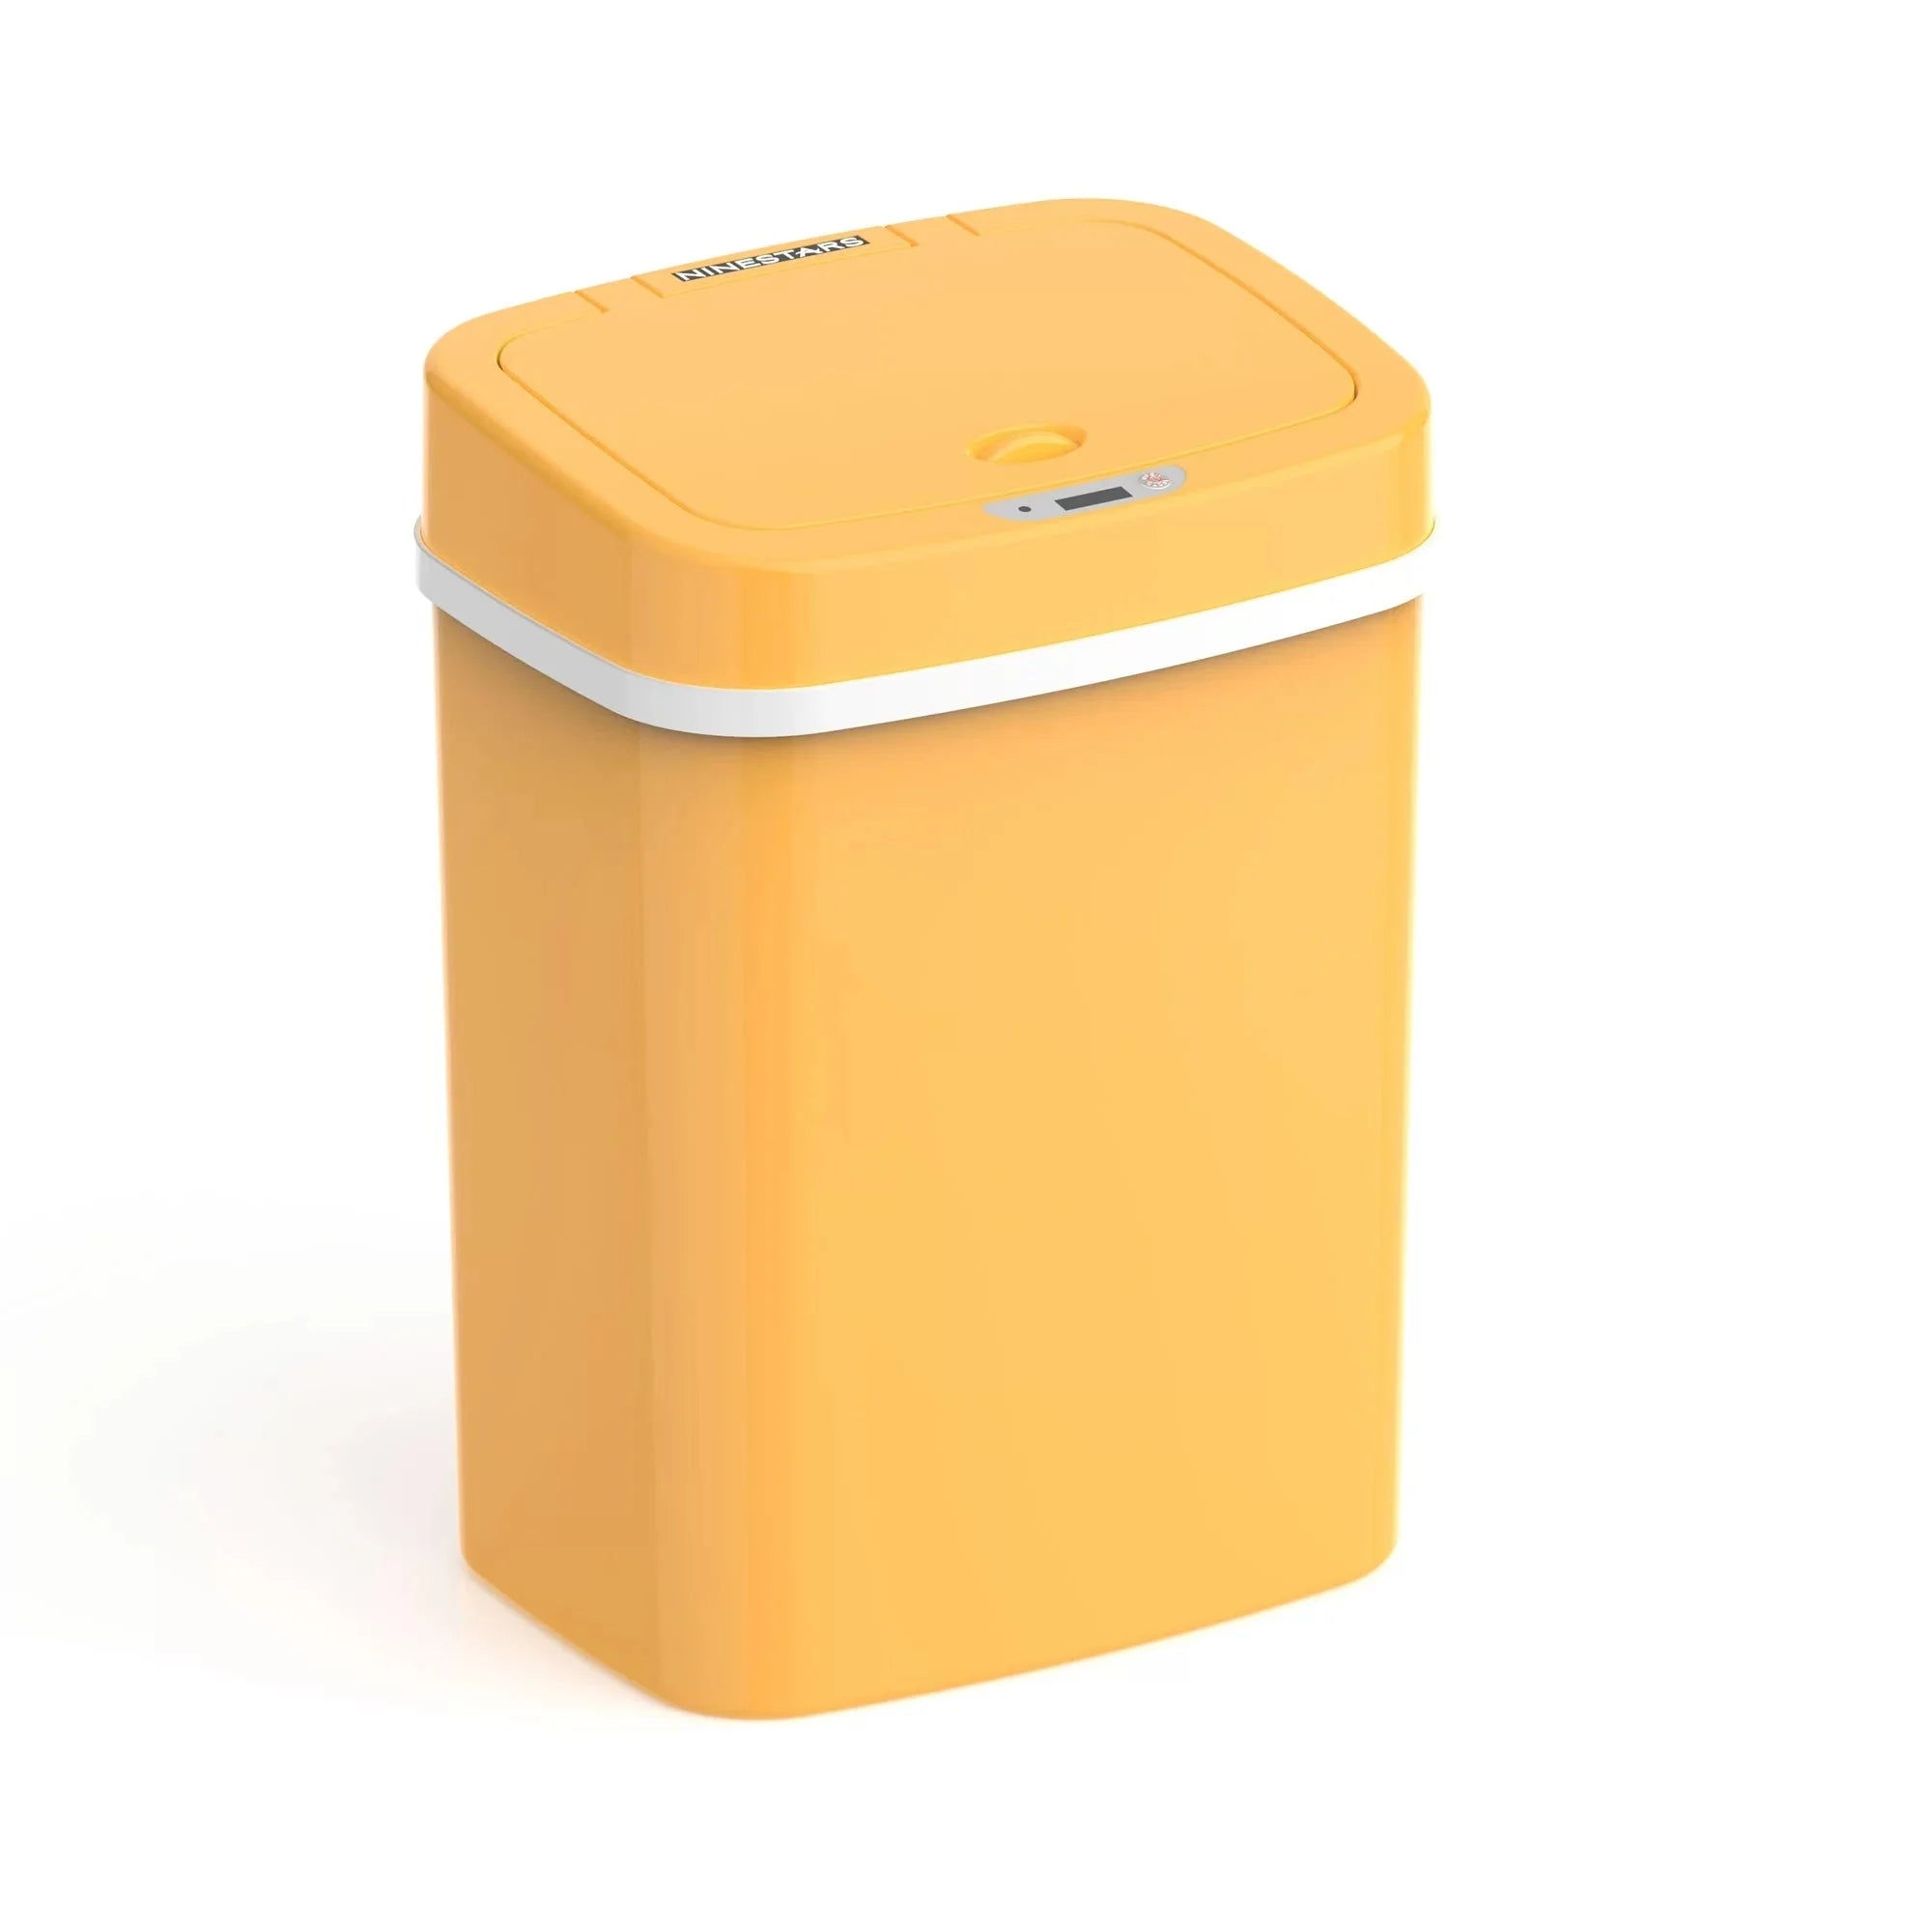 Wholesale prices with free shipping all over United States Nine Stars 3.2 Gallon Trash Can, Plastic Touchless Bathroom Trash Can, Yellow - Steven Deals